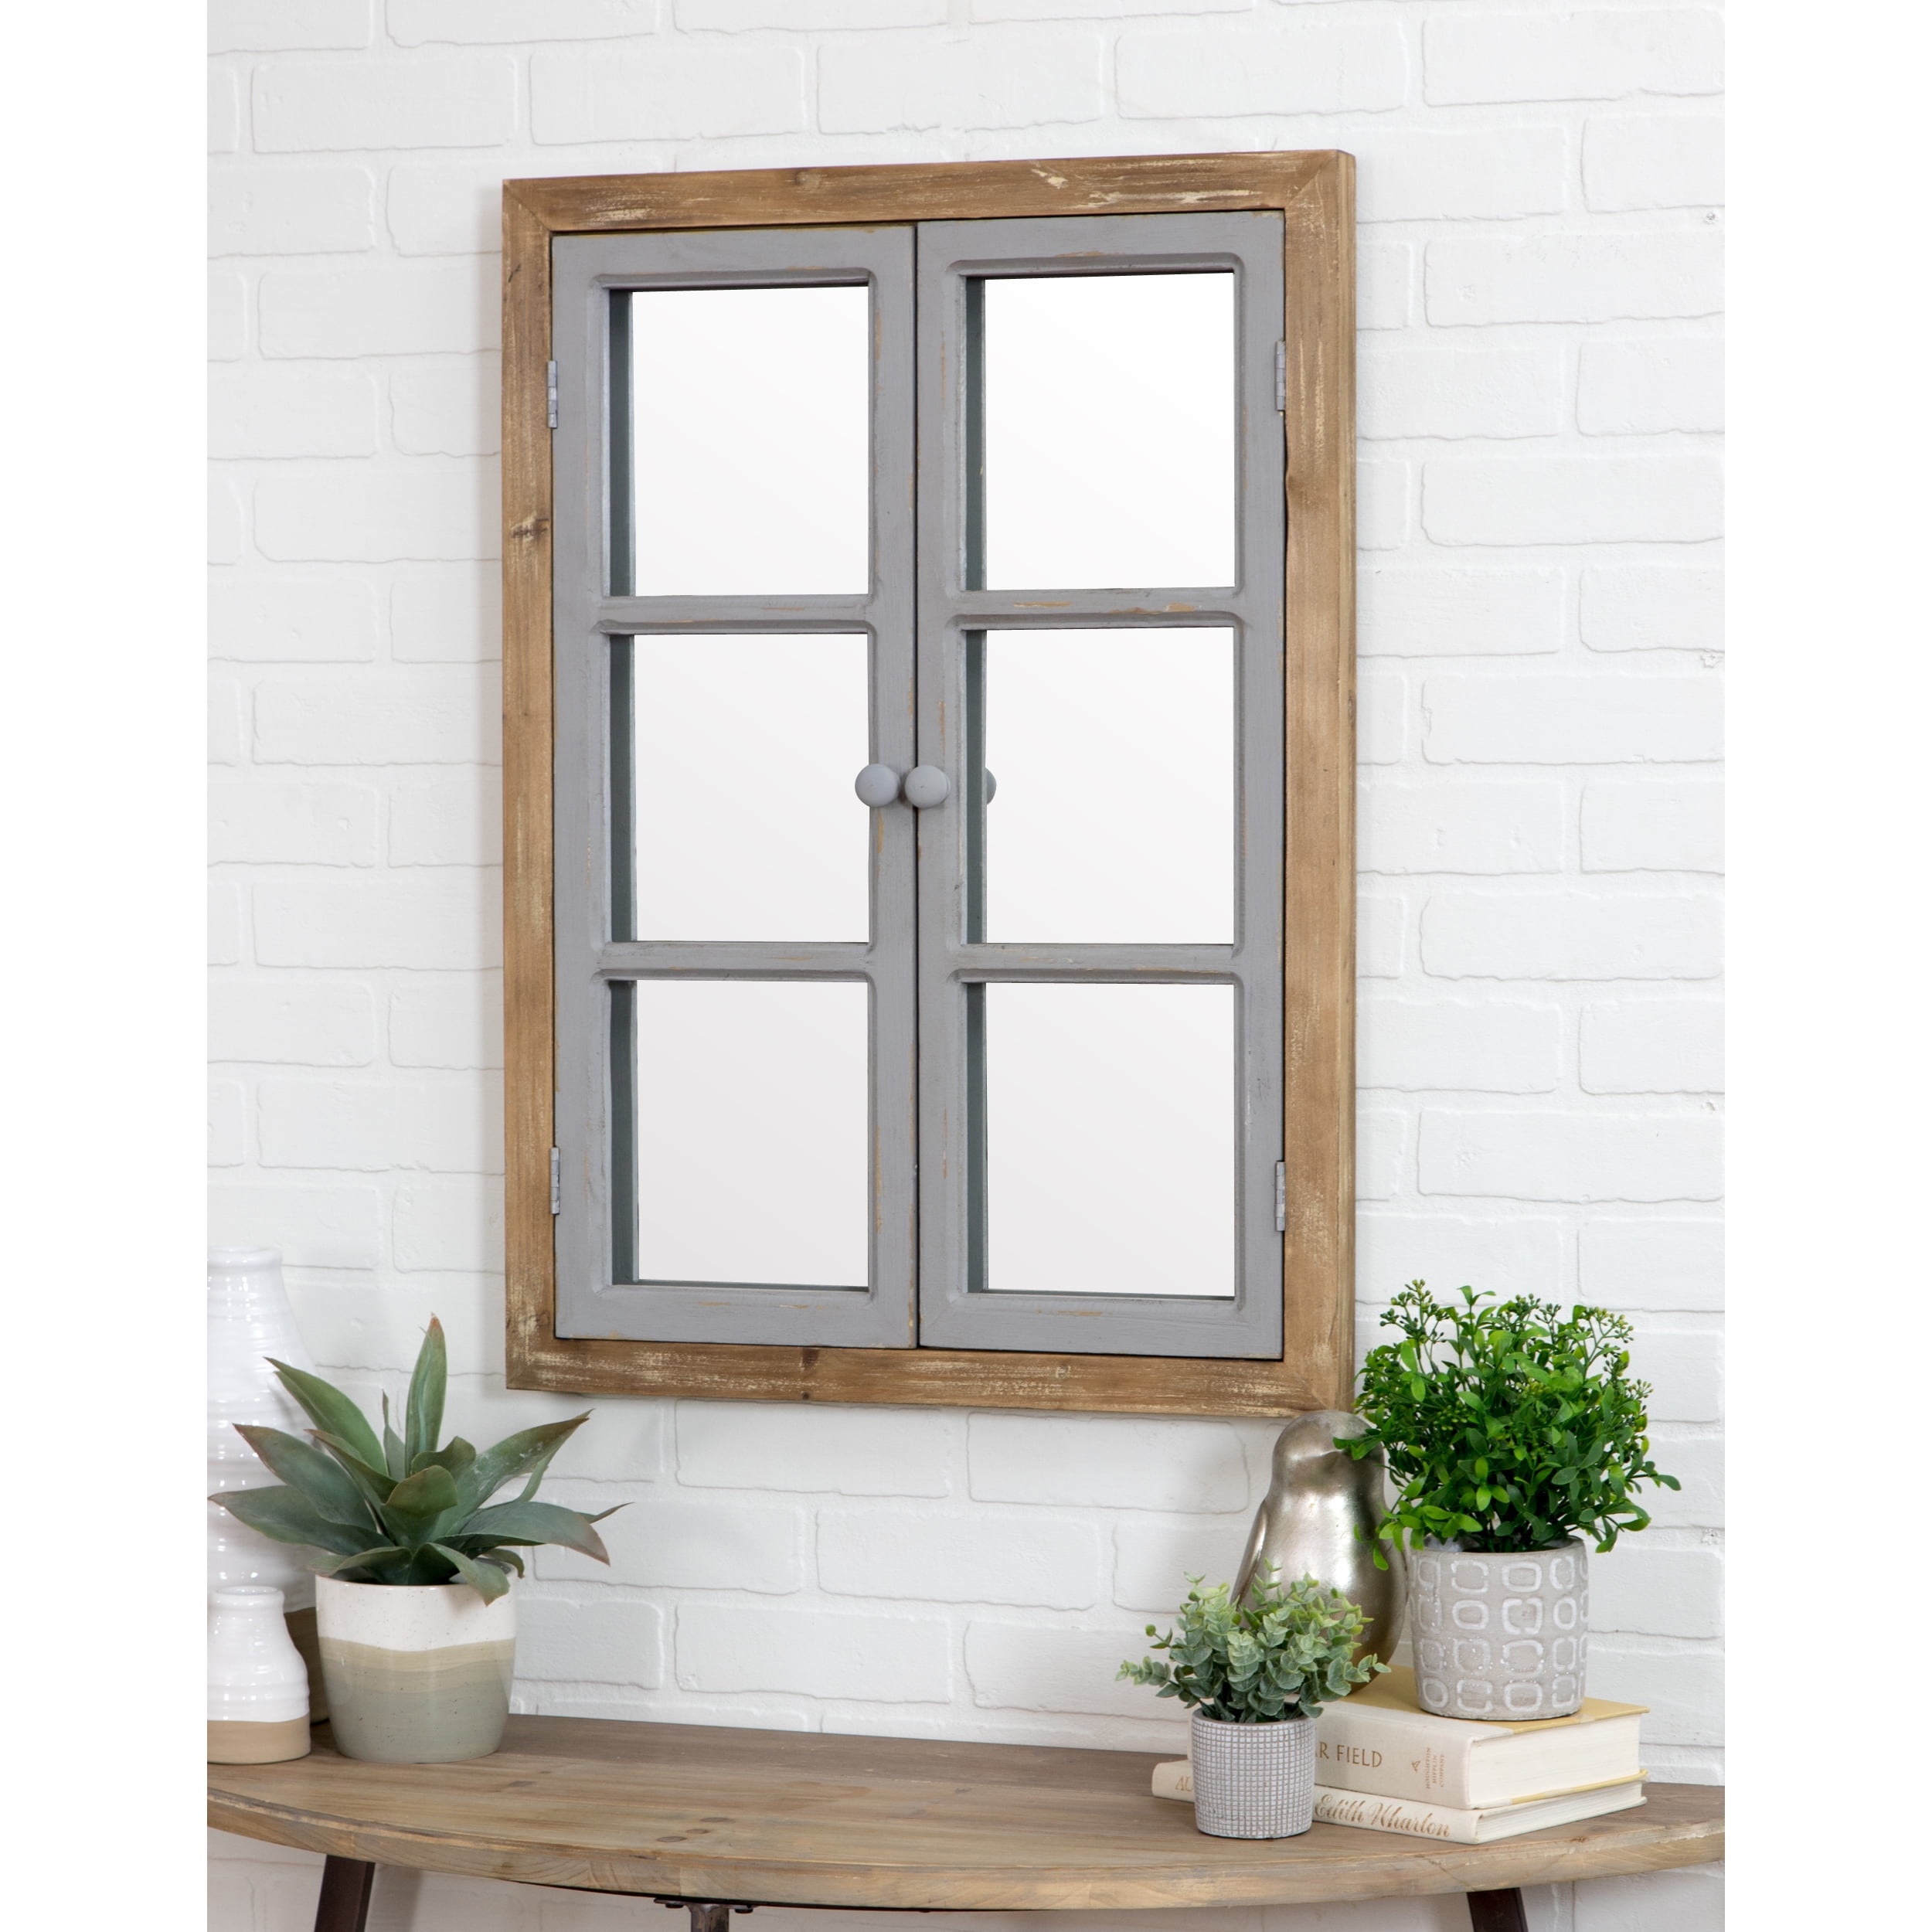 Picture of Aspire 5537 Somerset Window Pane Wall Mirror, Brown